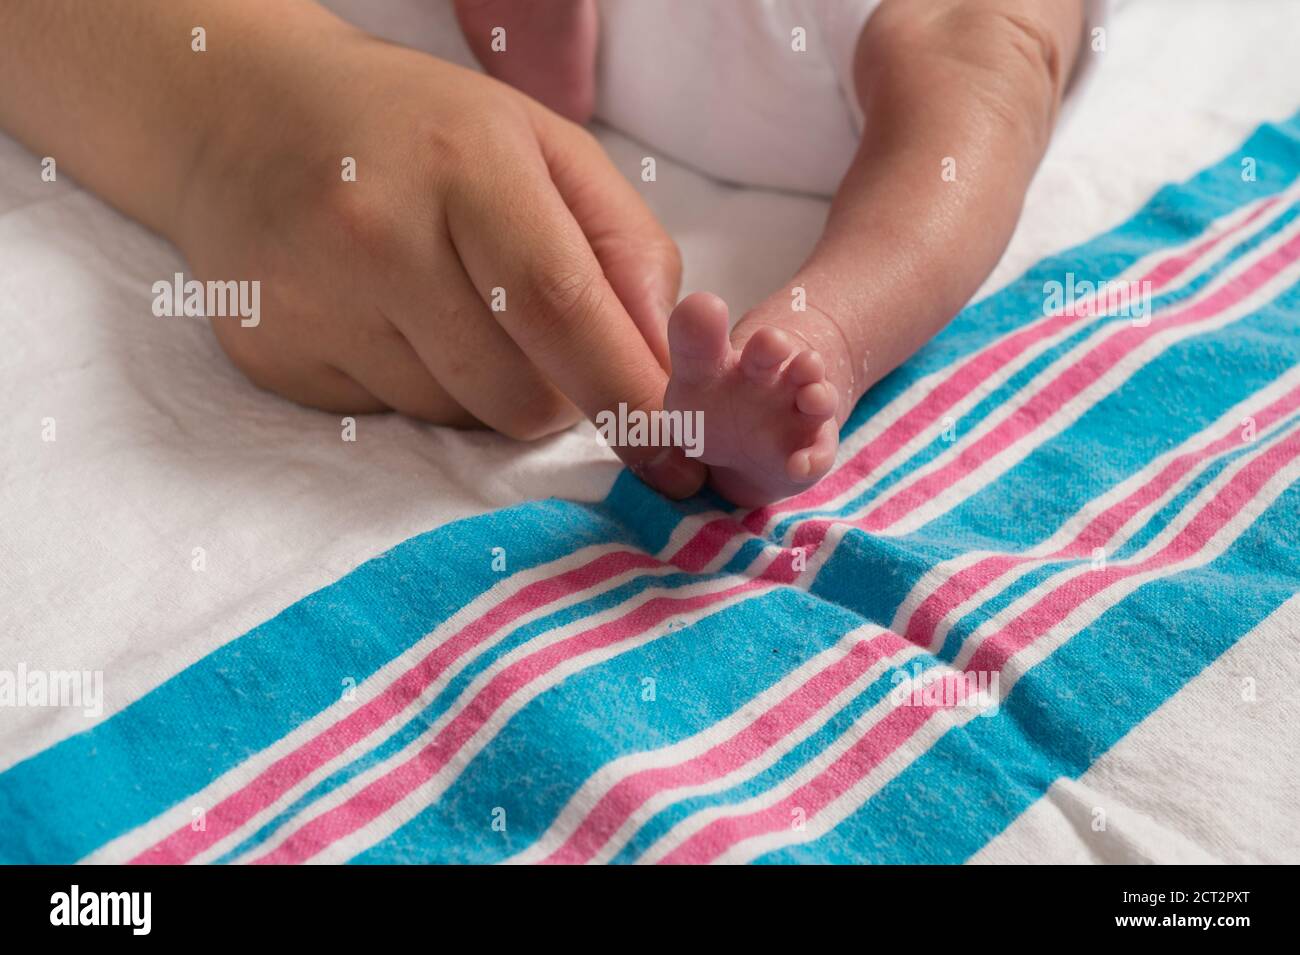 10 day old newborn baby girl closeup of foot reflex Babinski adult hand touching side of foot causing toes to fan out Stock Photo